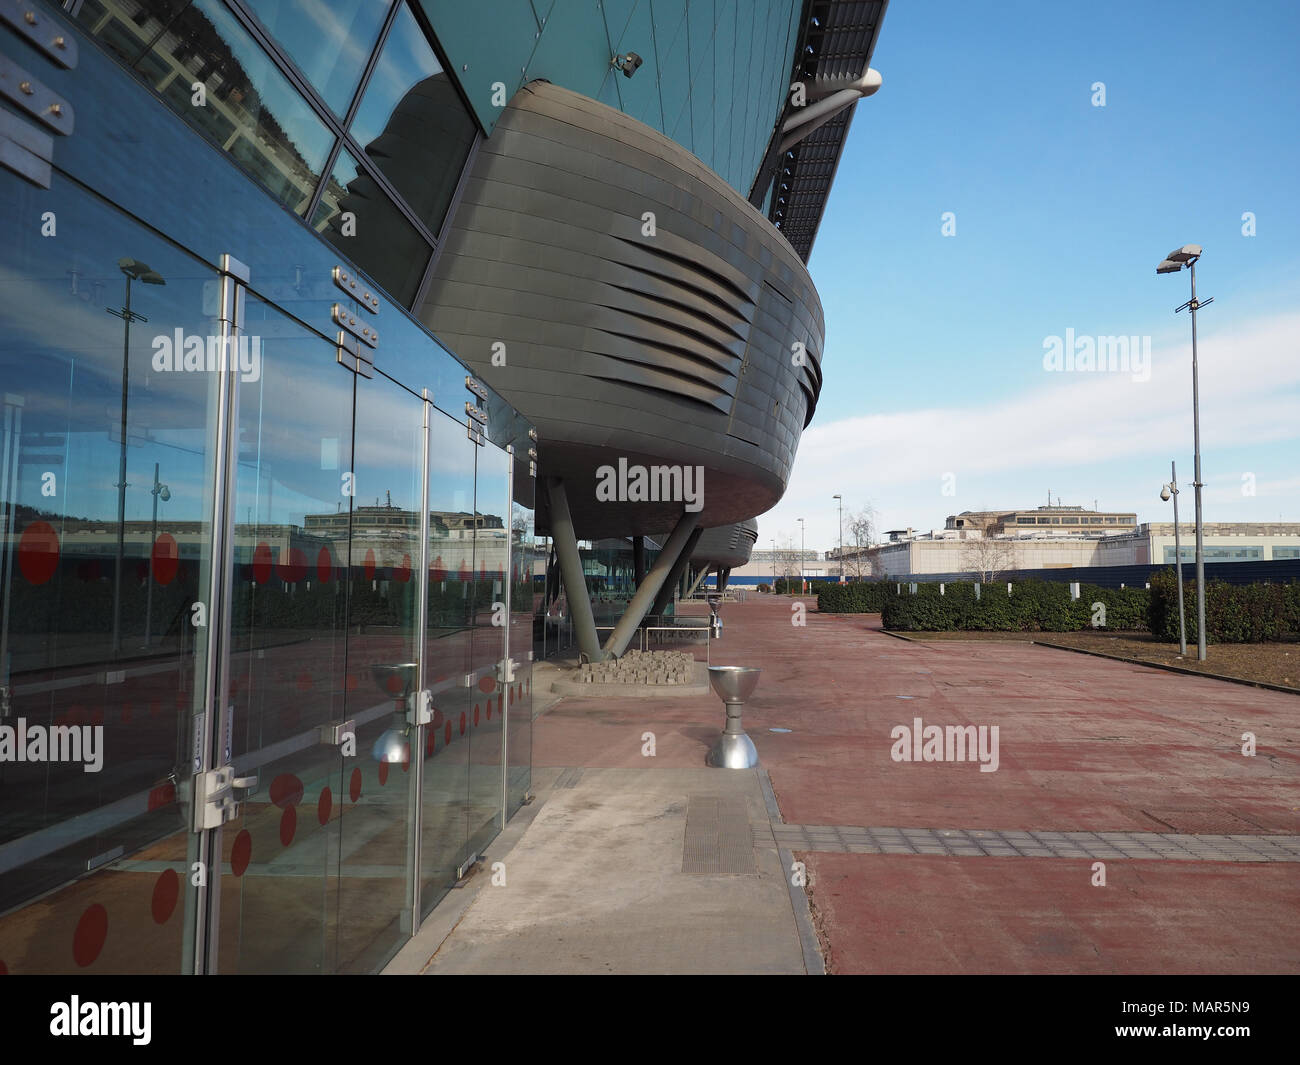 TURIN, ITALIE - CIRCA JANVIER 2018 : Oval Lingotto salle omnisports Banque D'Images